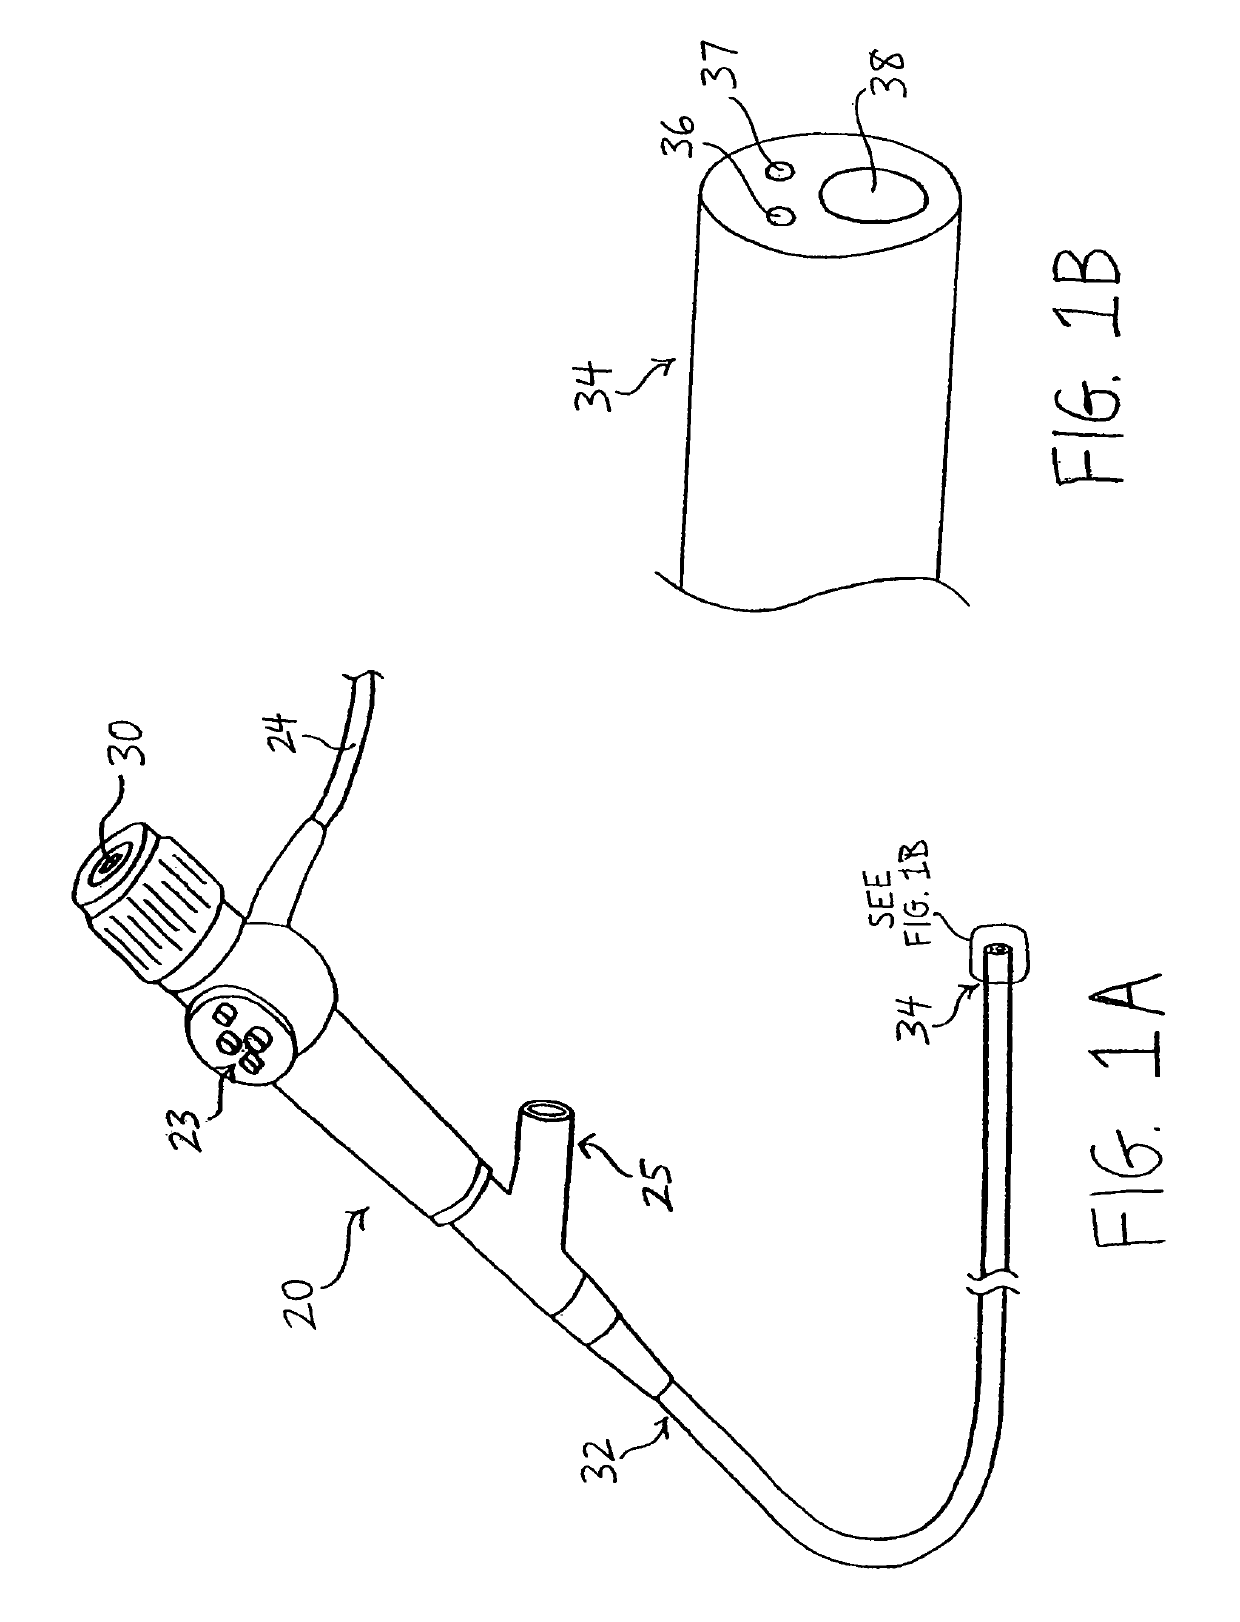 Endoscopic system for resection of tissue